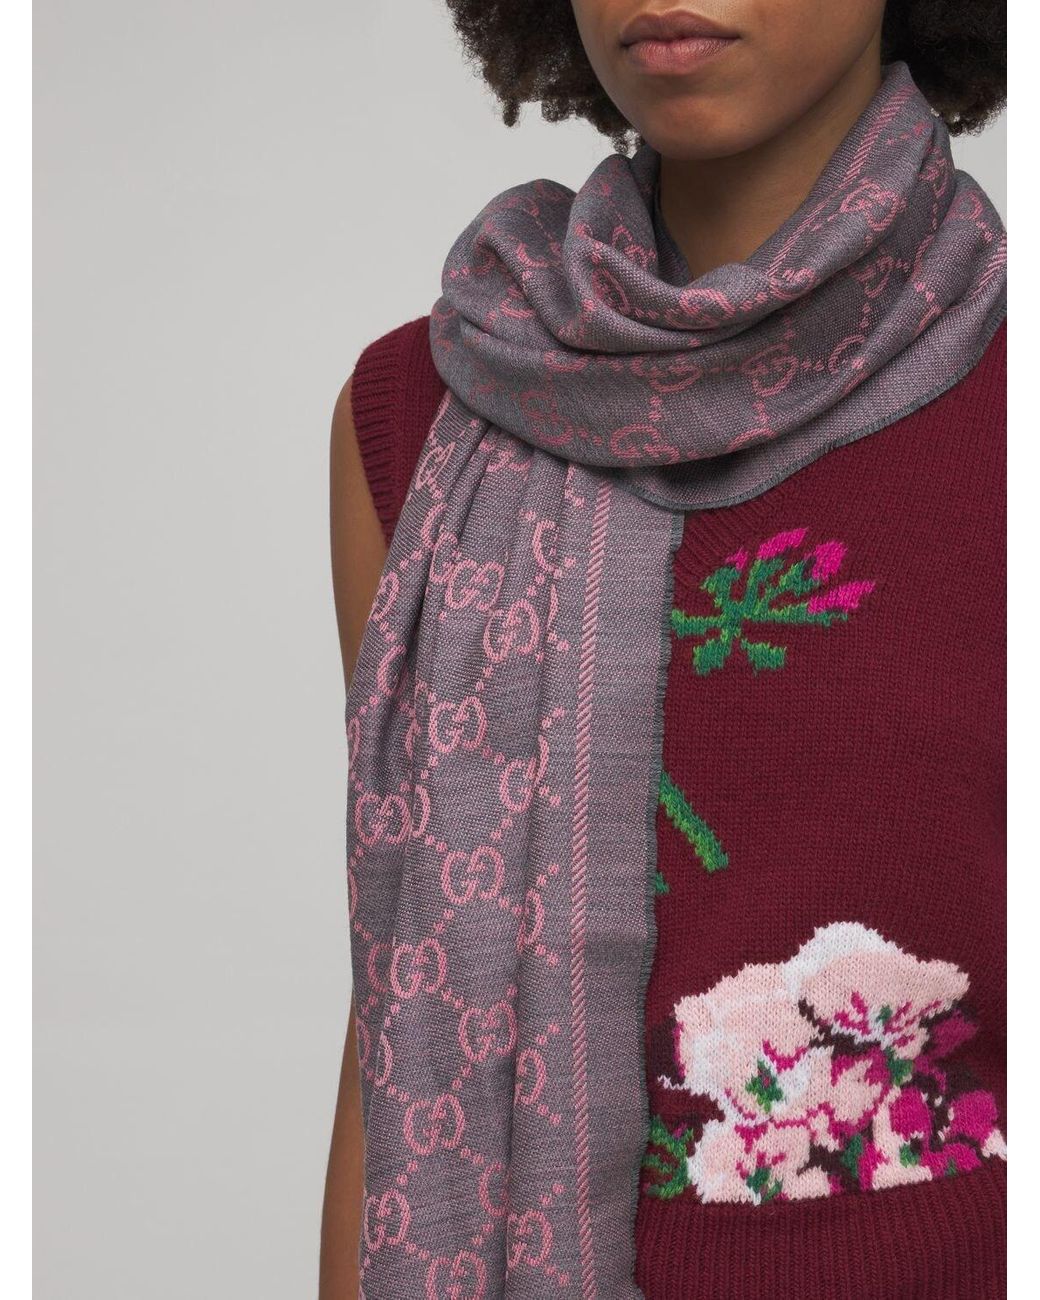 Gucci Wool Gg Jacquard Pattern Knit Scarf in Pink/Grey (Pink) - Lyst